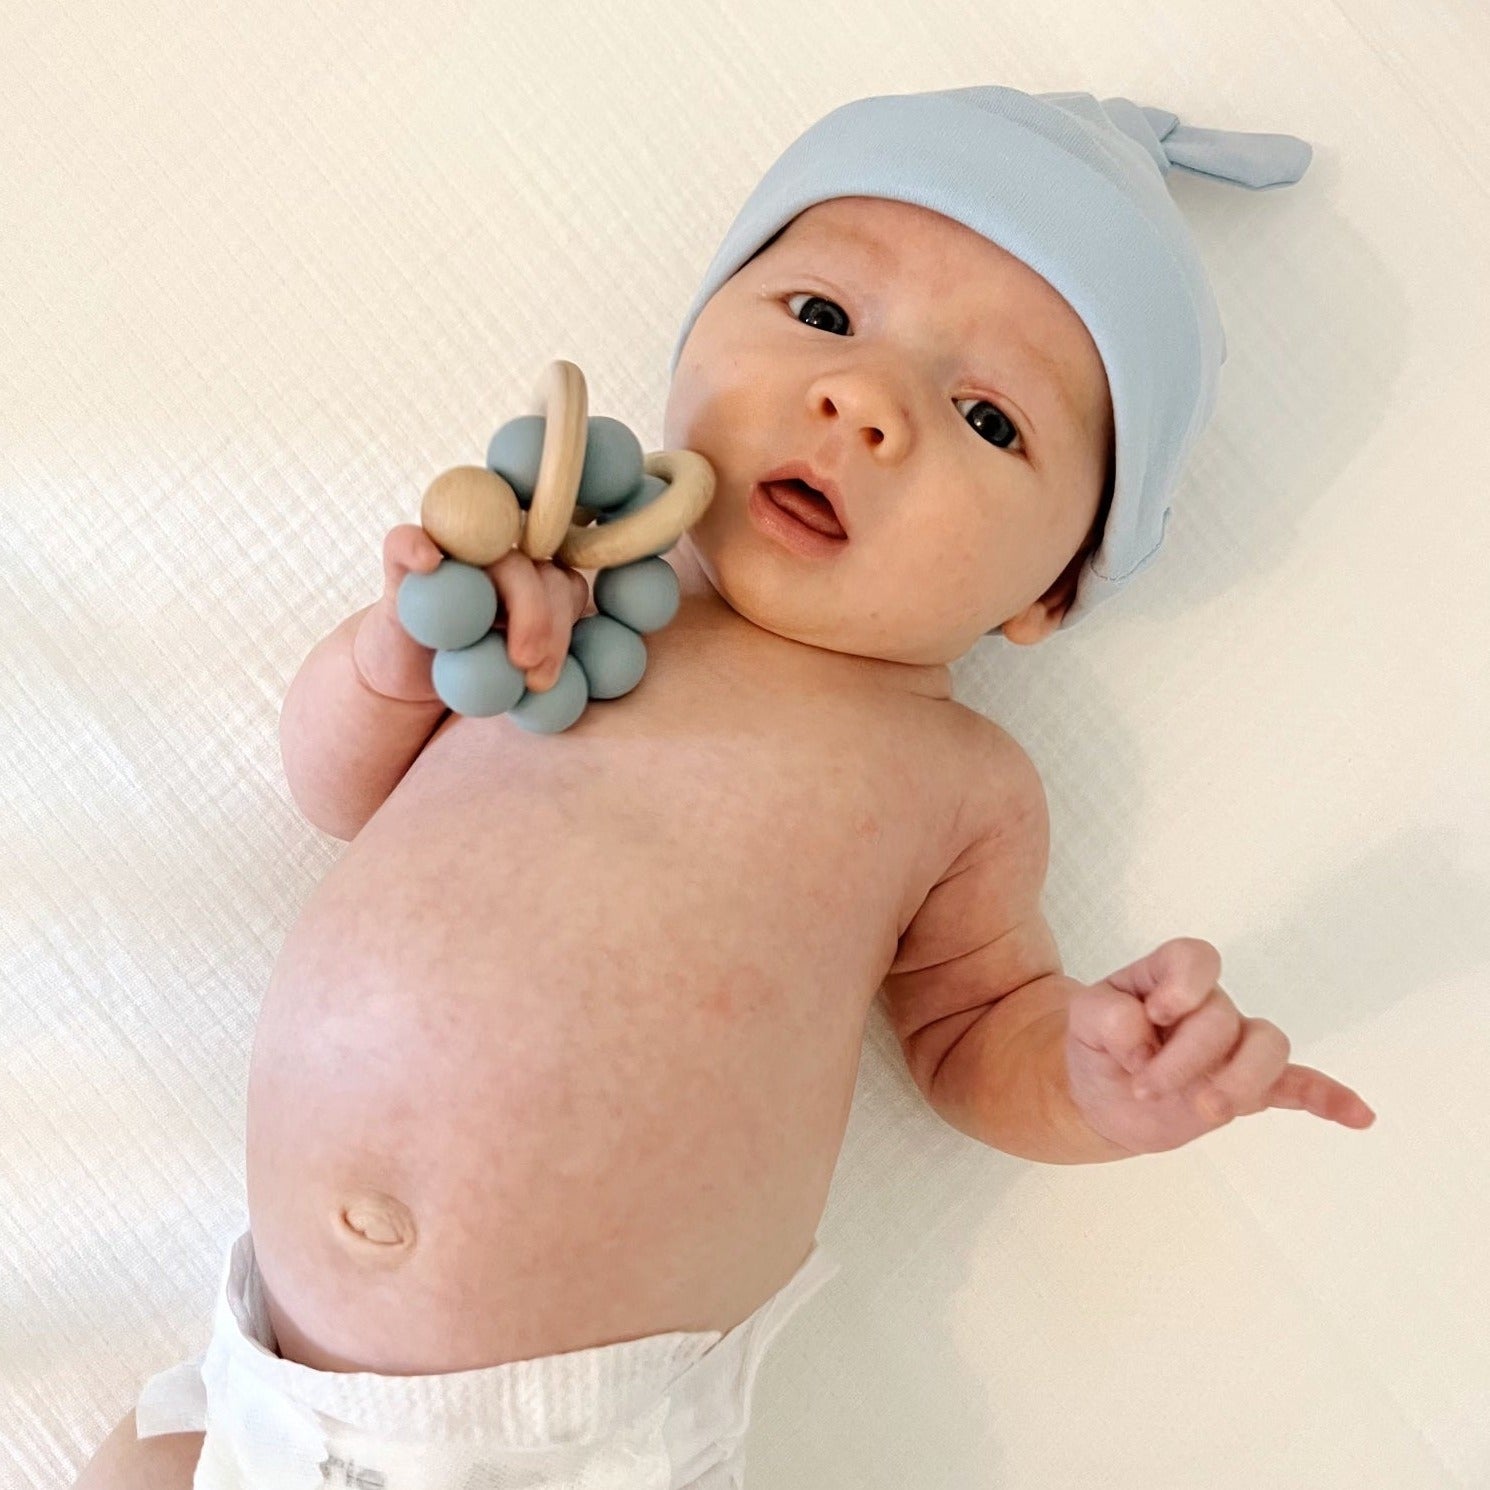 A baby wearing a blue topknot cotton hat and holding a blue silicone baby teether while laying on a white muslin crib sheet.